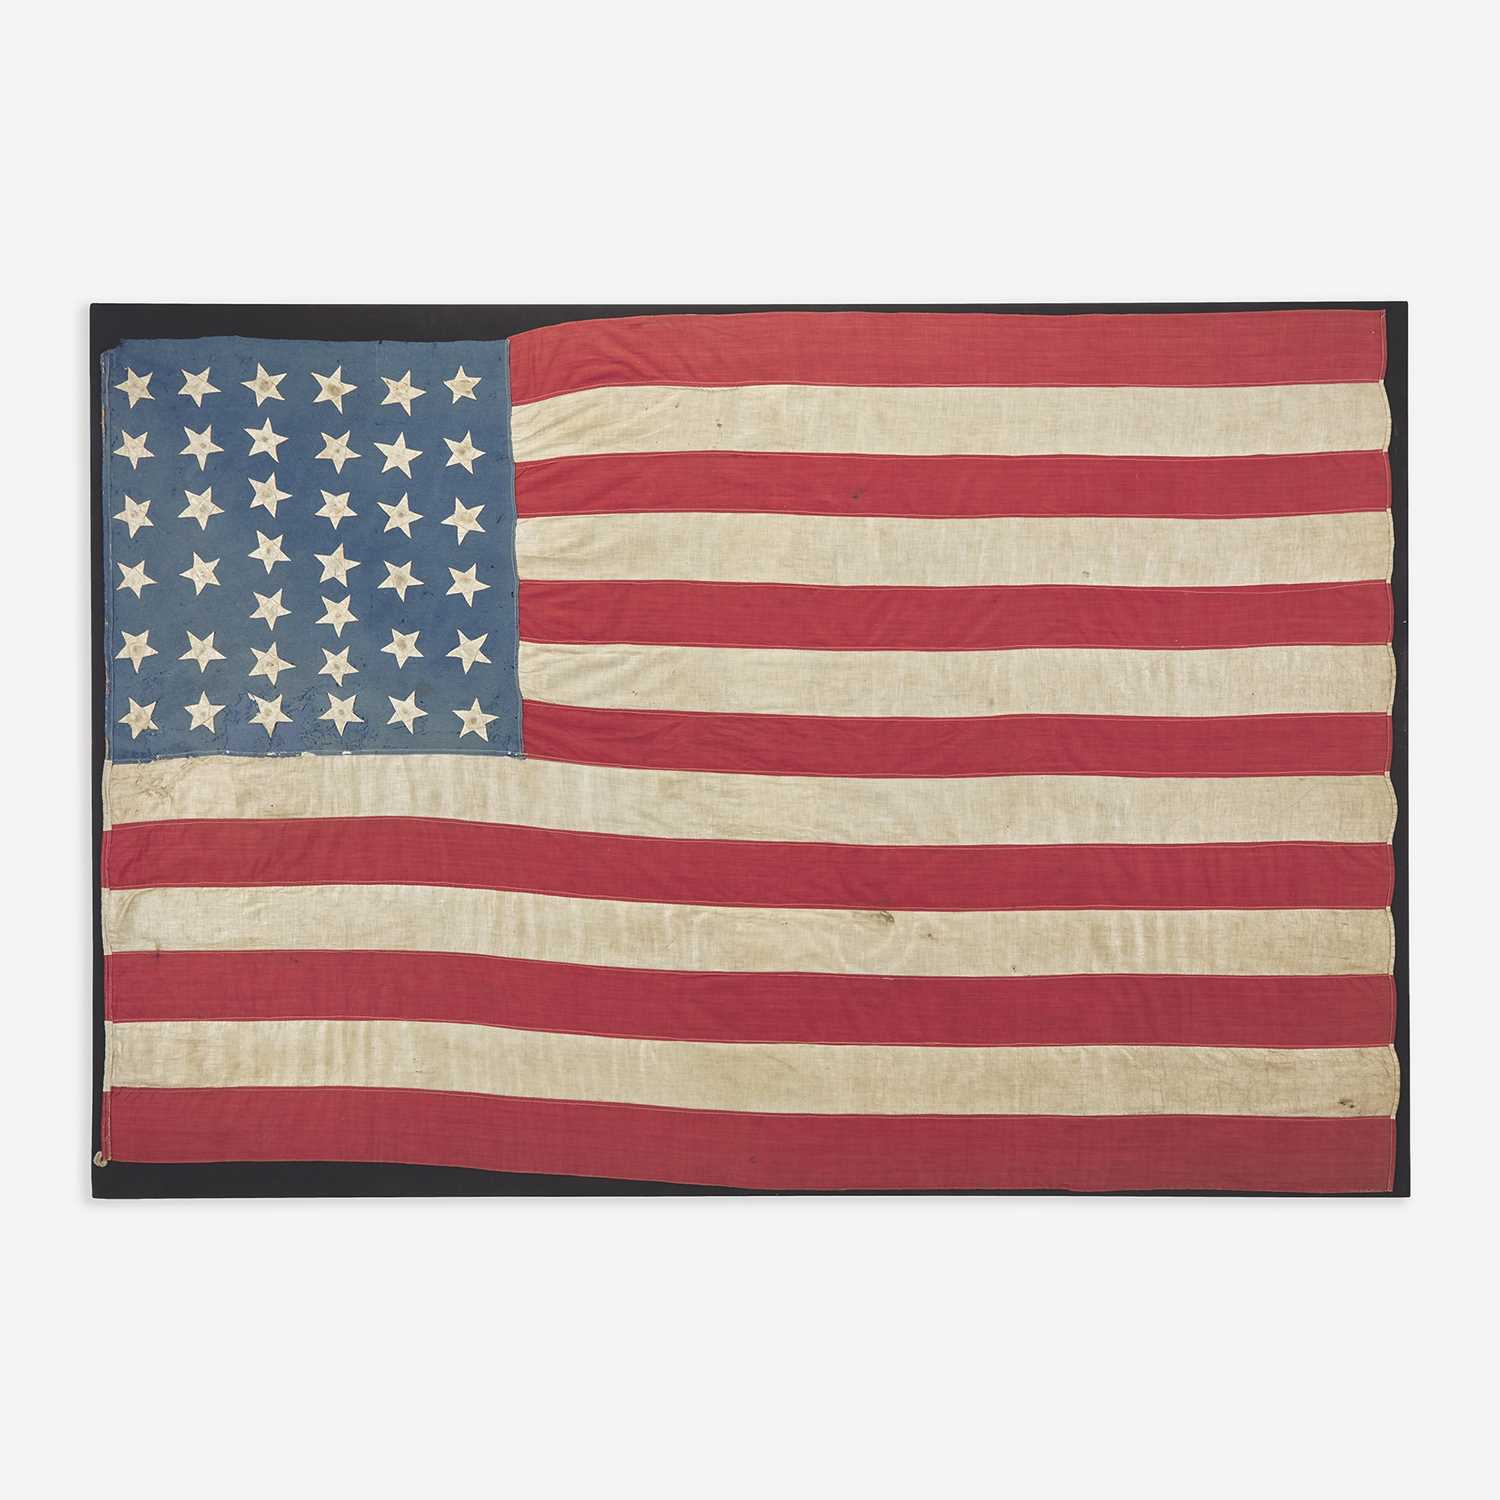 Lot 23 - A 38-Star National American Flag commemorating Colorado statehood